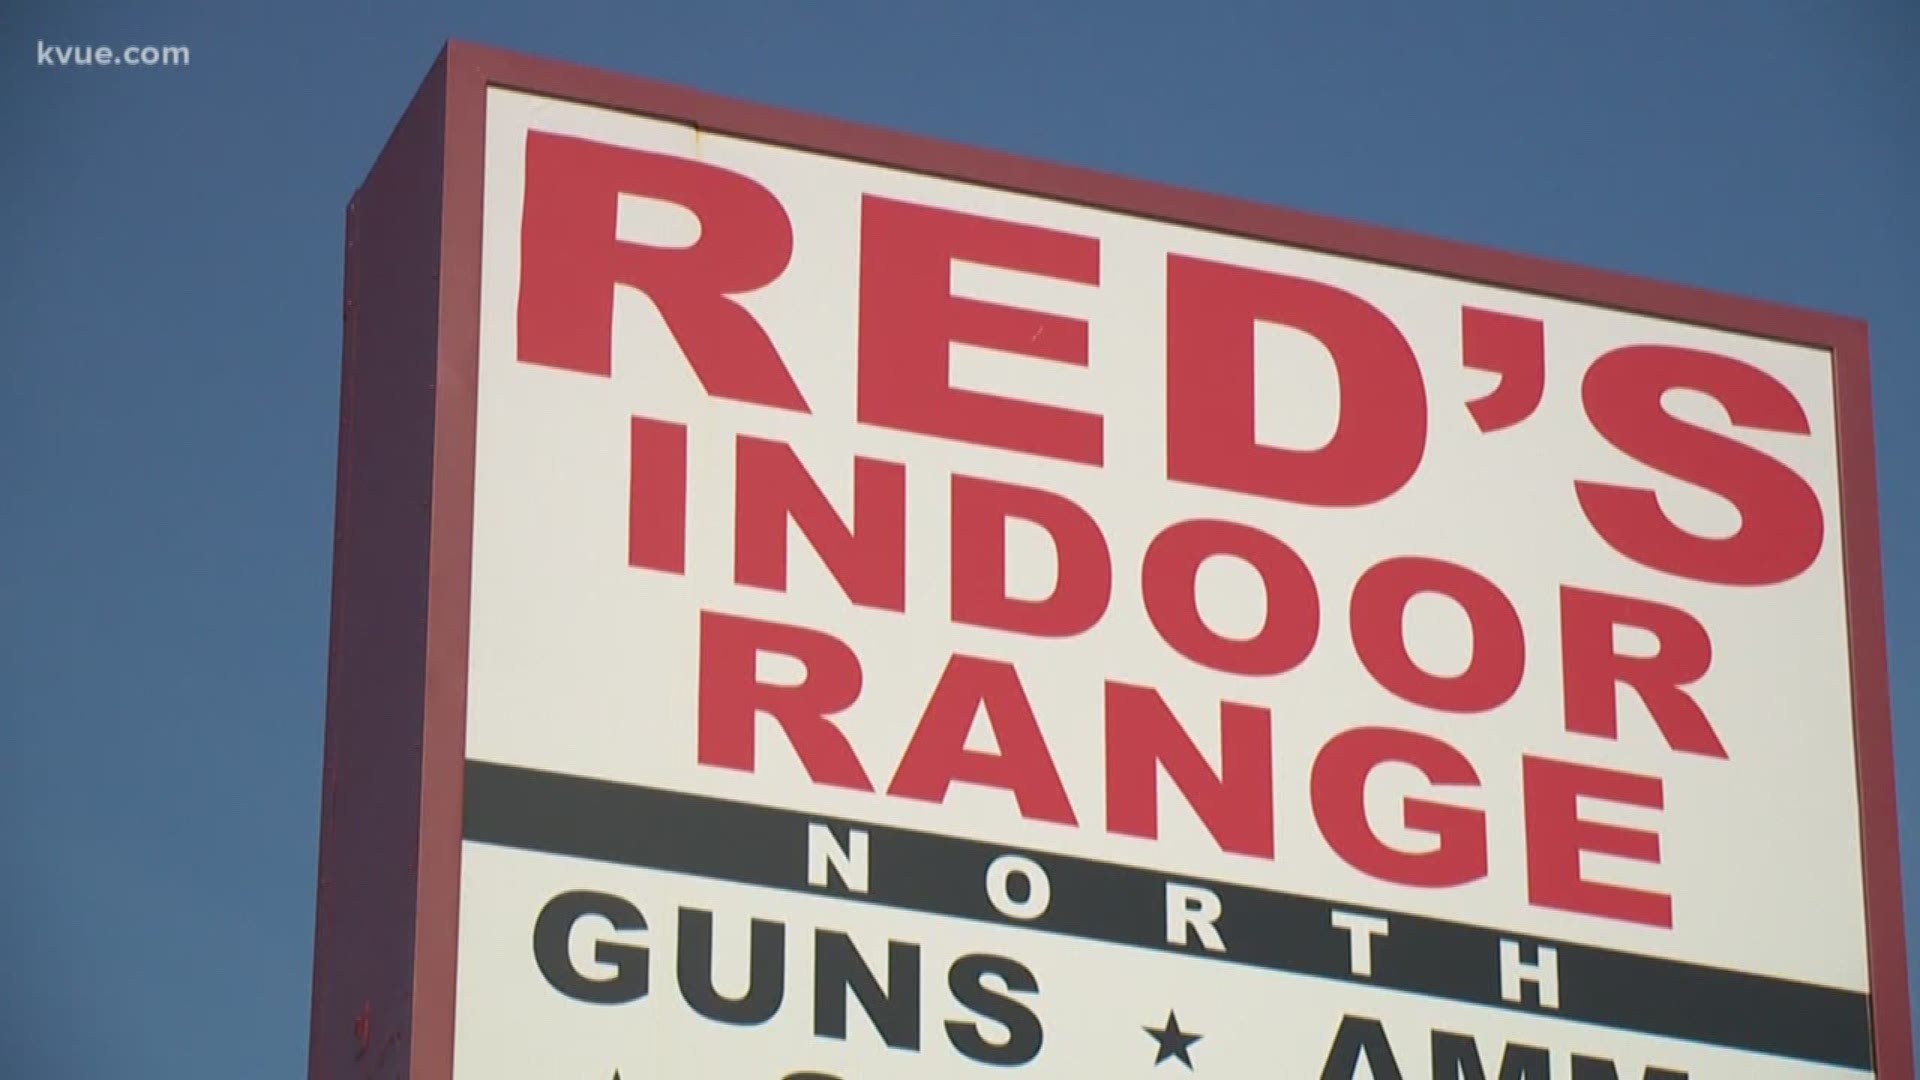 One person was injured by a gunshot Sunday at Red's Indoor Range in Pflugerville.